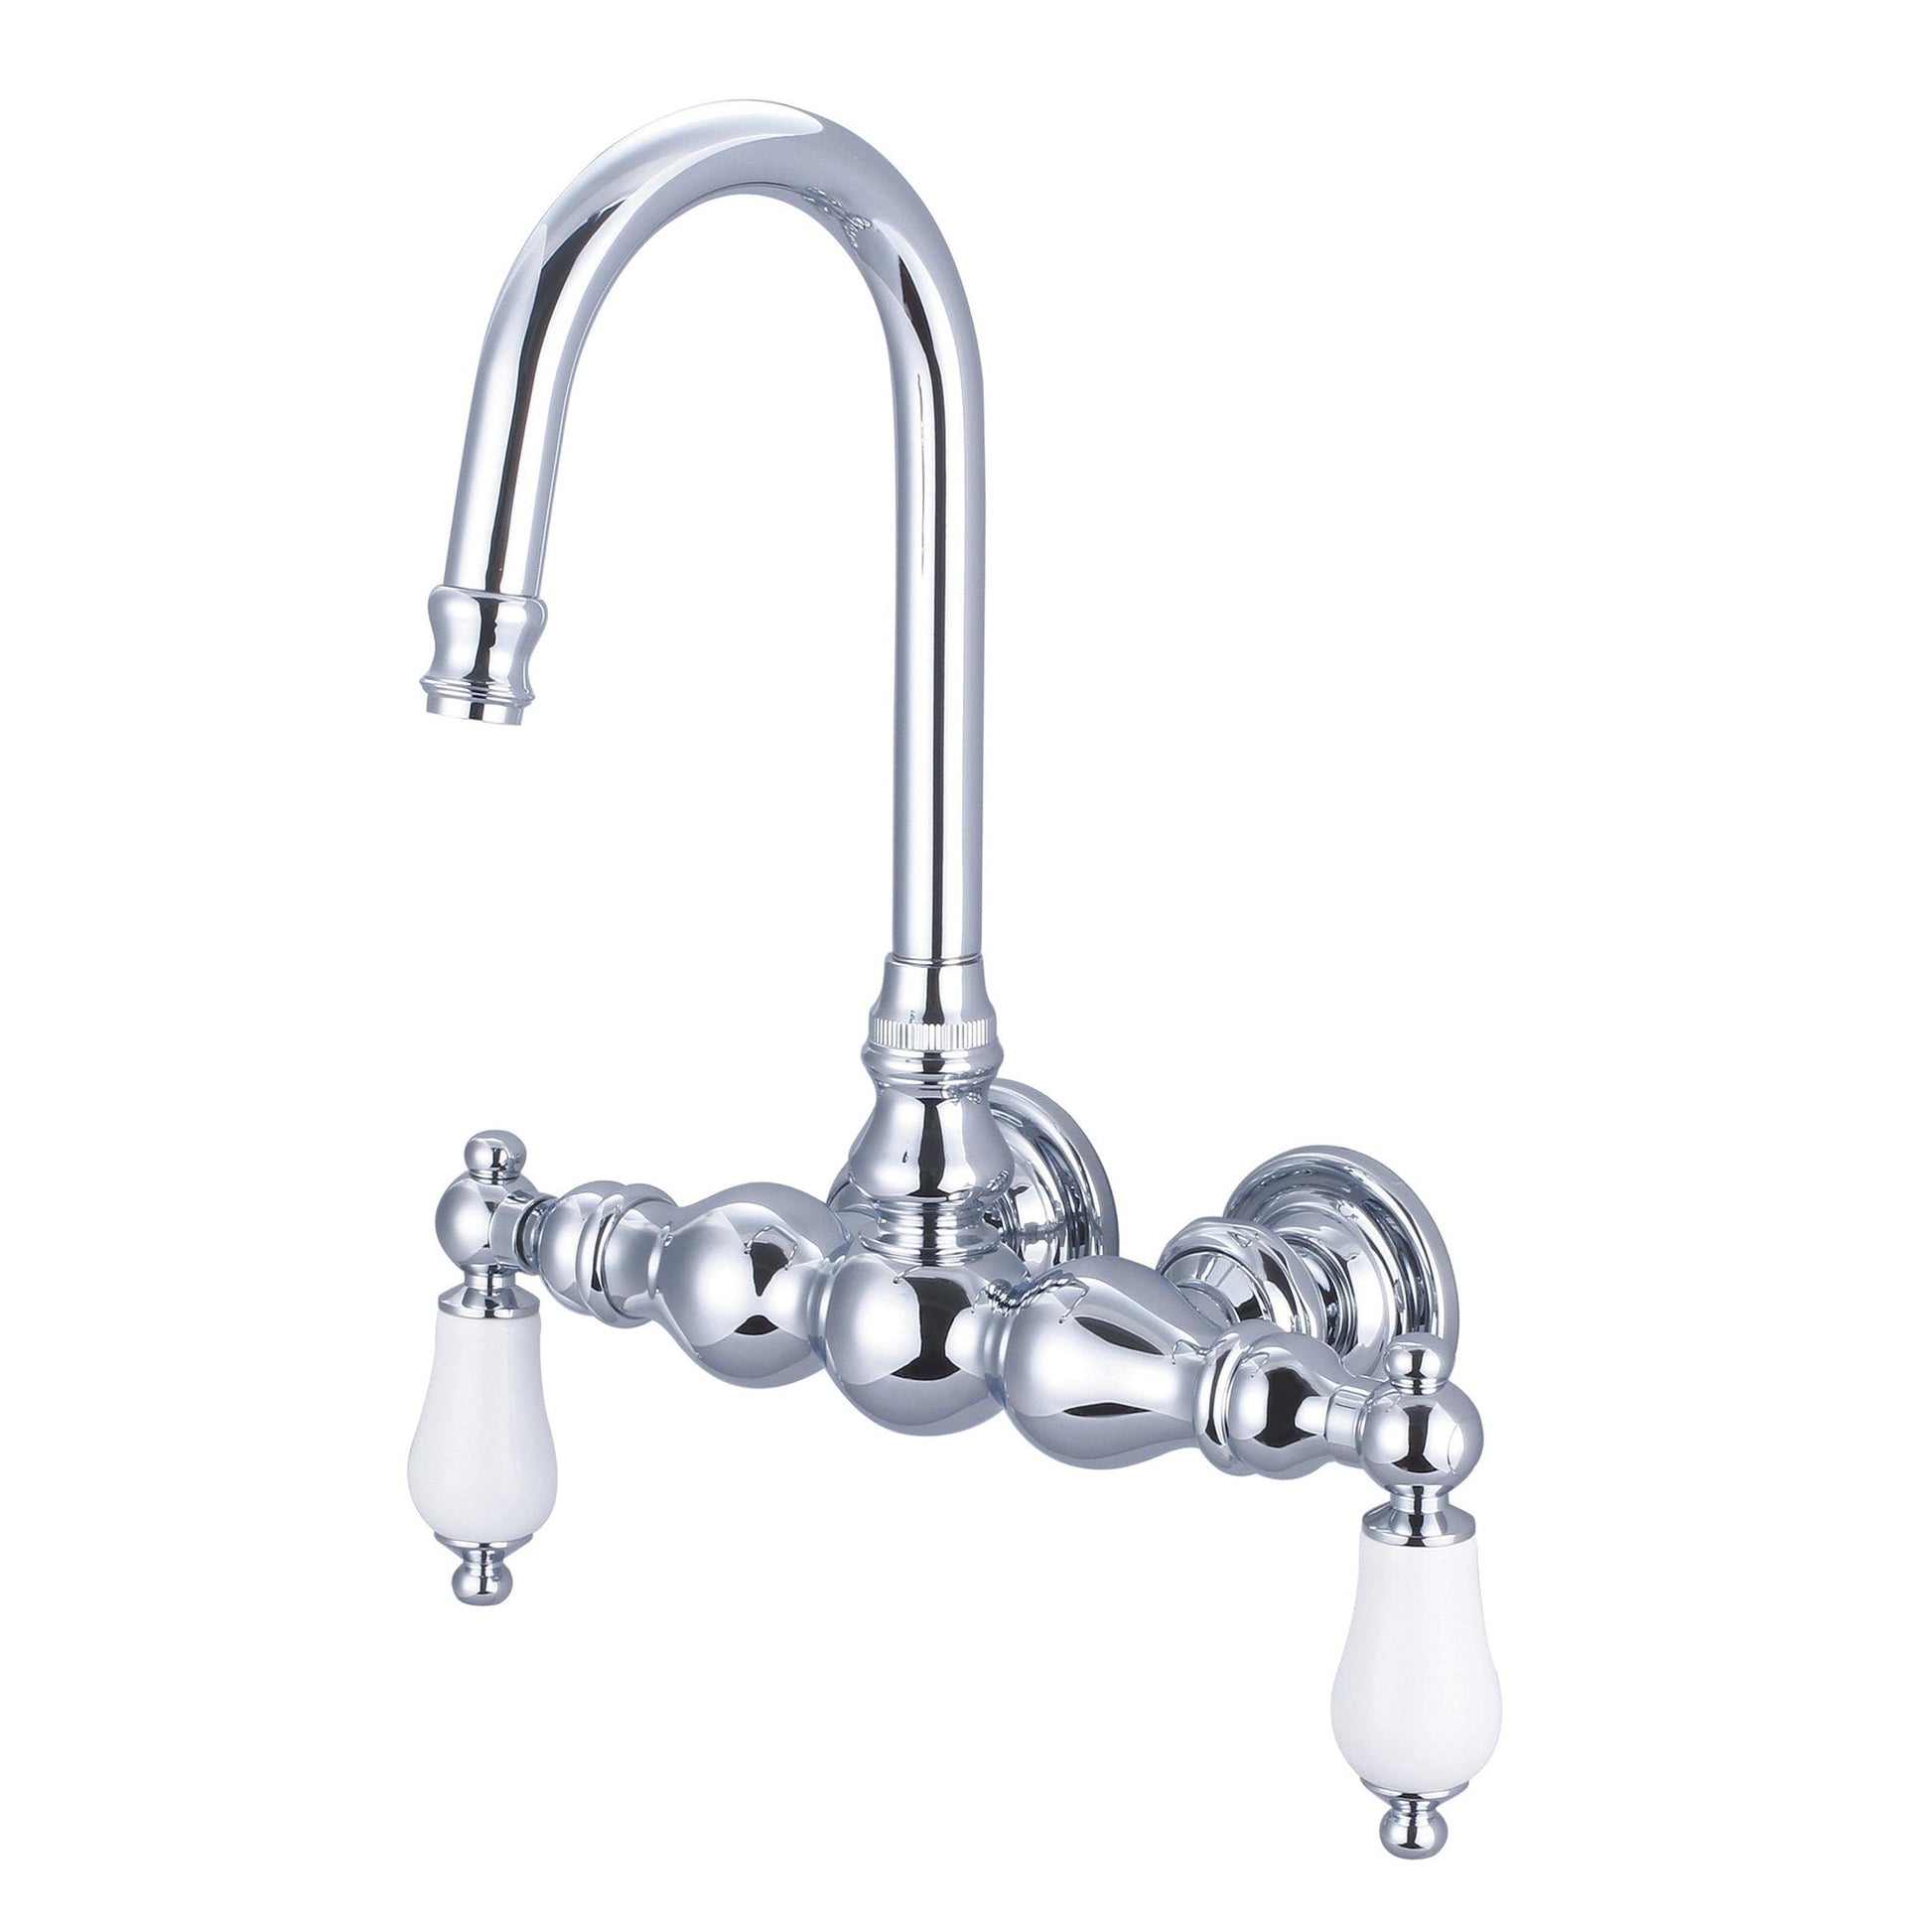 Water Creation Vintage Classic Center Wall Mount Tub F6-0014 9.25" Silver Solid Brass Faucet With Gooseneck Spout And Straight Wall Connector And Porcelain Lever Handles Without Labels